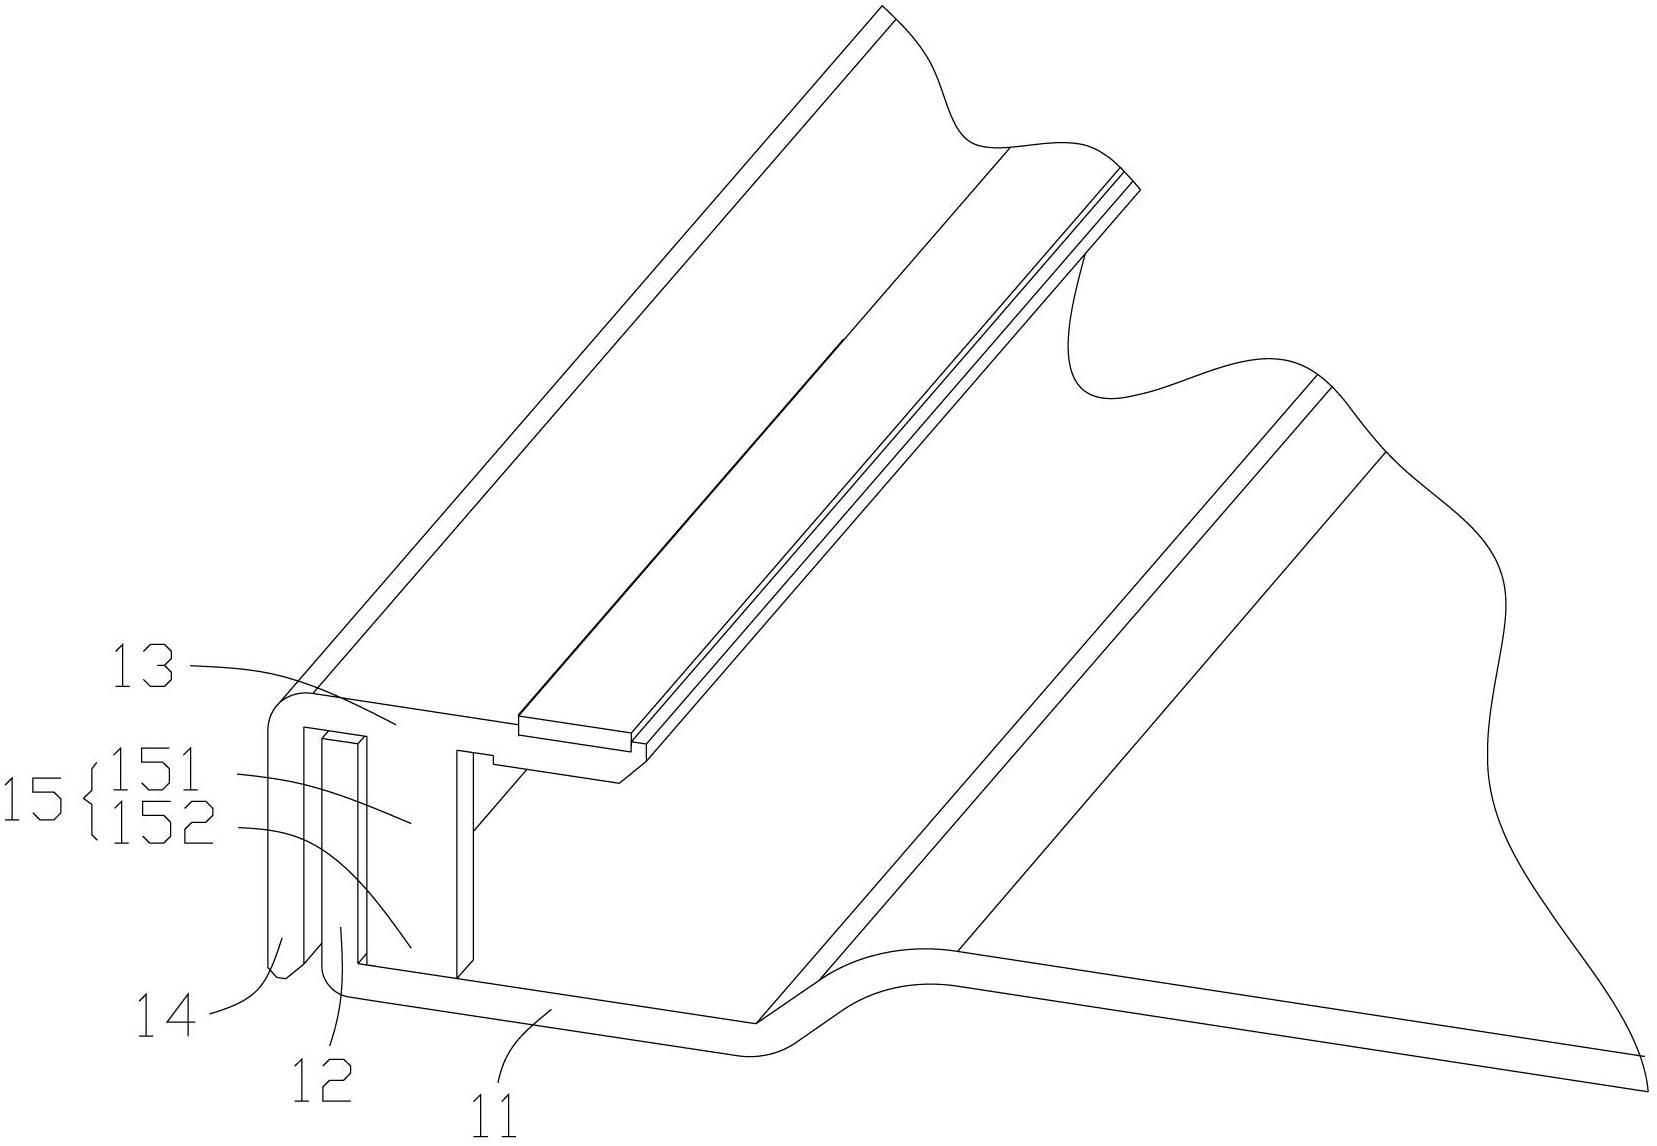 Display device, backlight module and frame unit